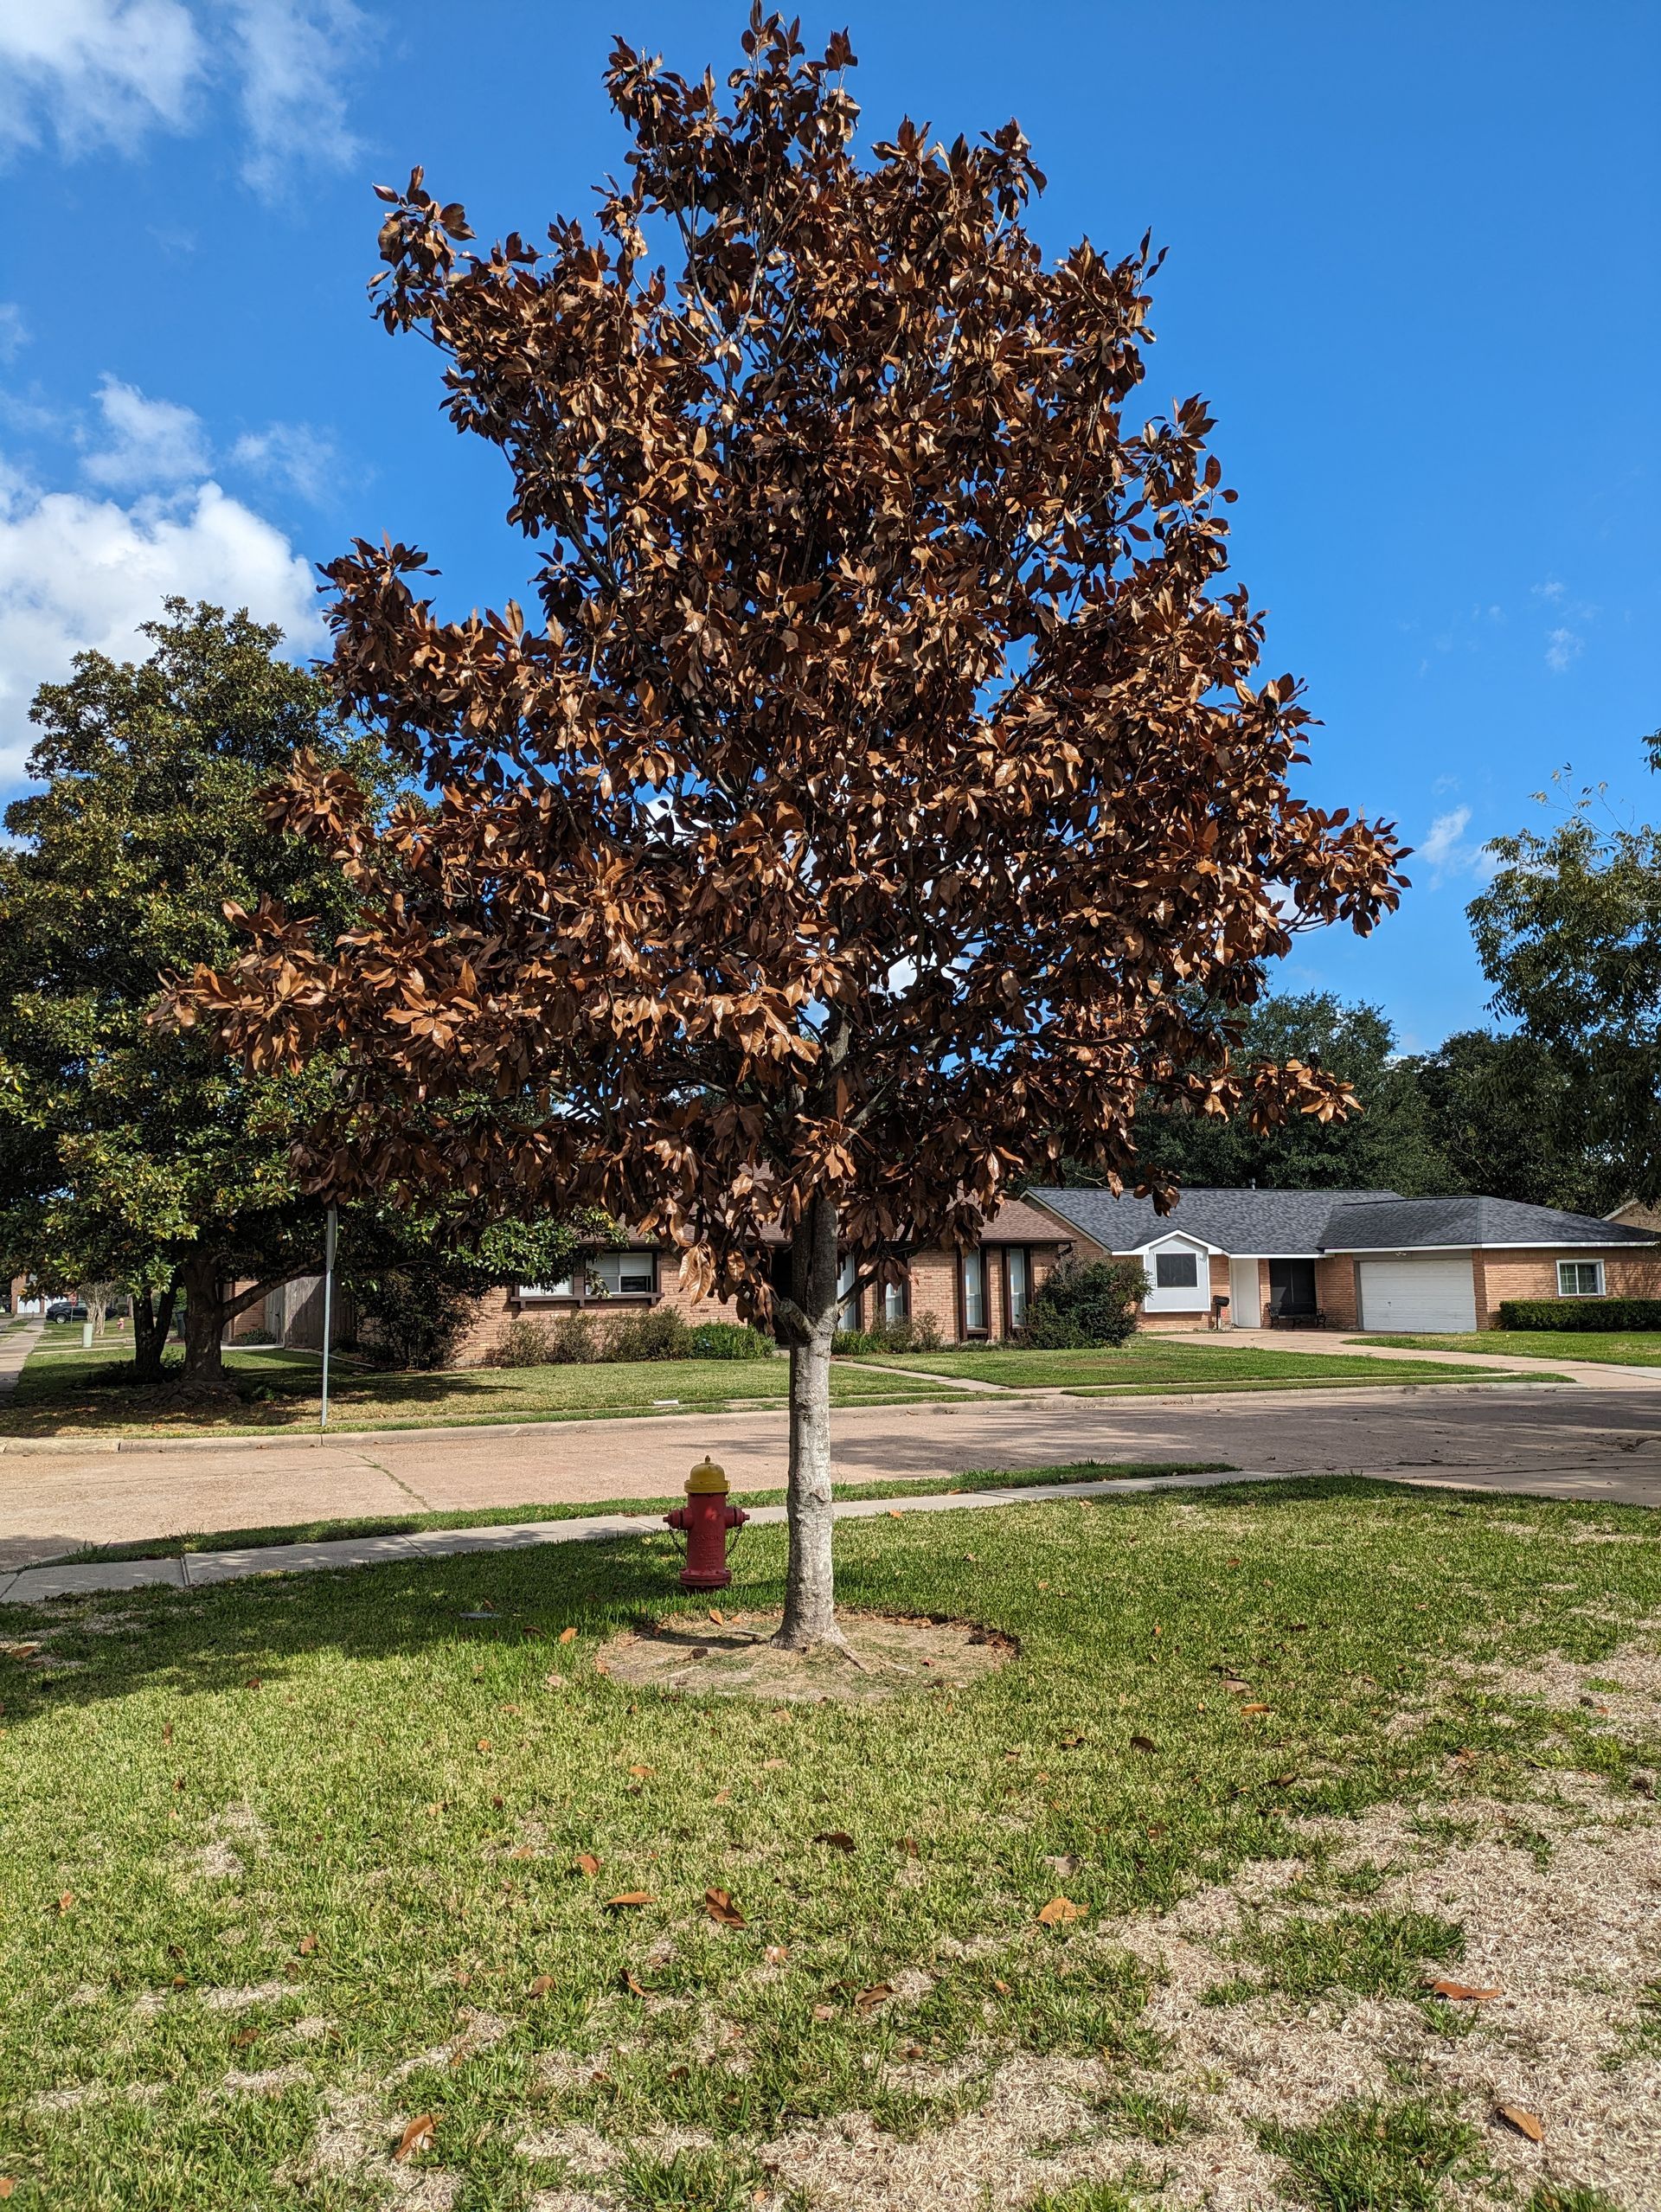 This photo is of a Magnolia Tree that has suffered embolisms causing it to die.